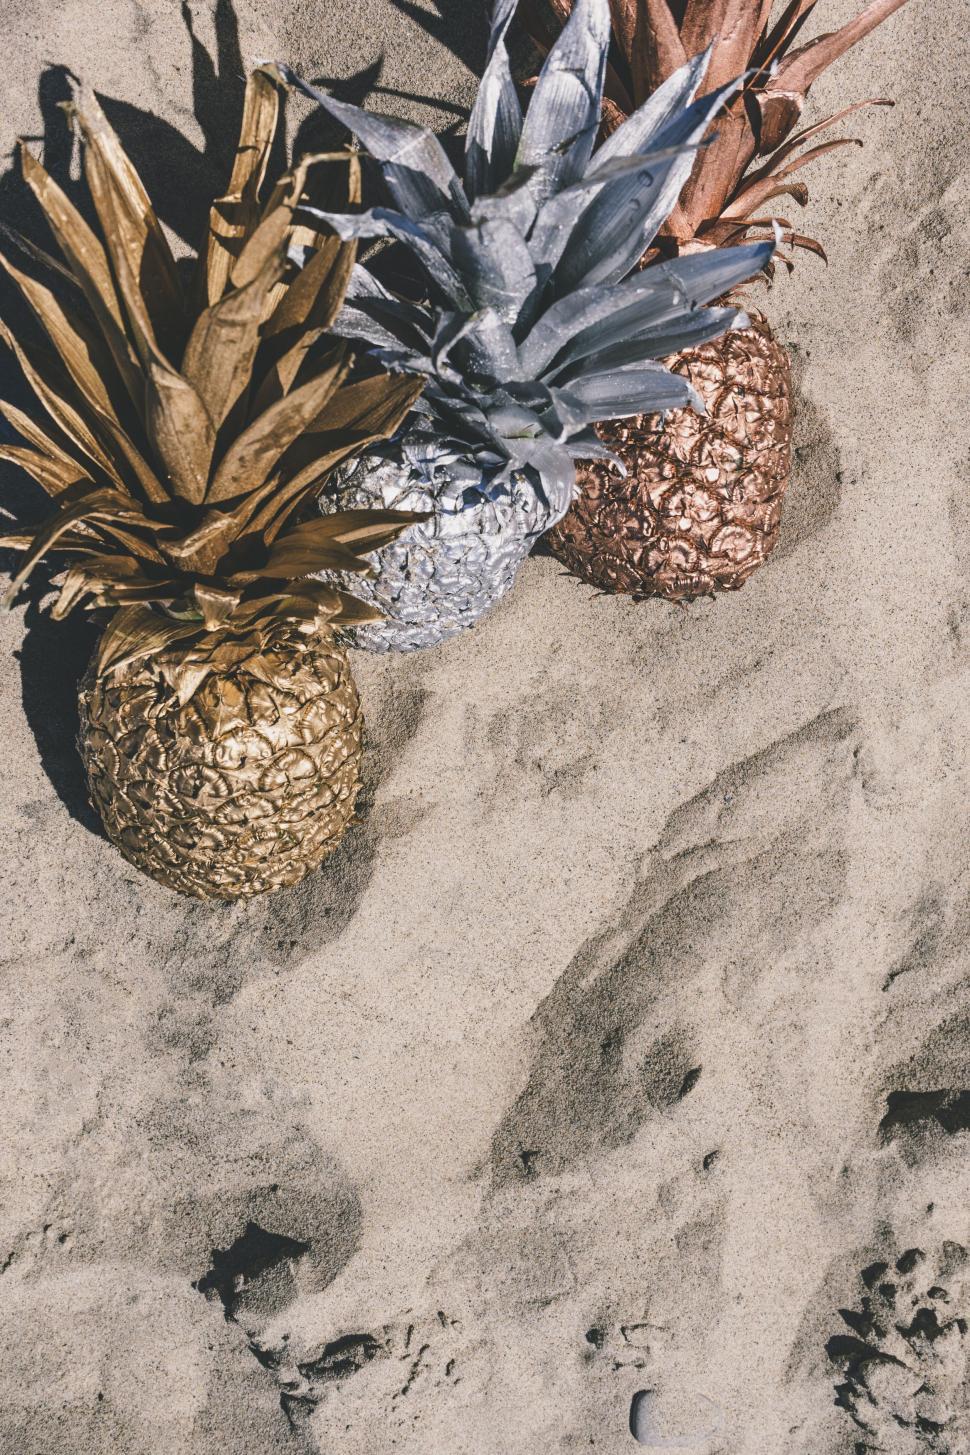 Free Image of Pineapples Resting on Sandy Beach 